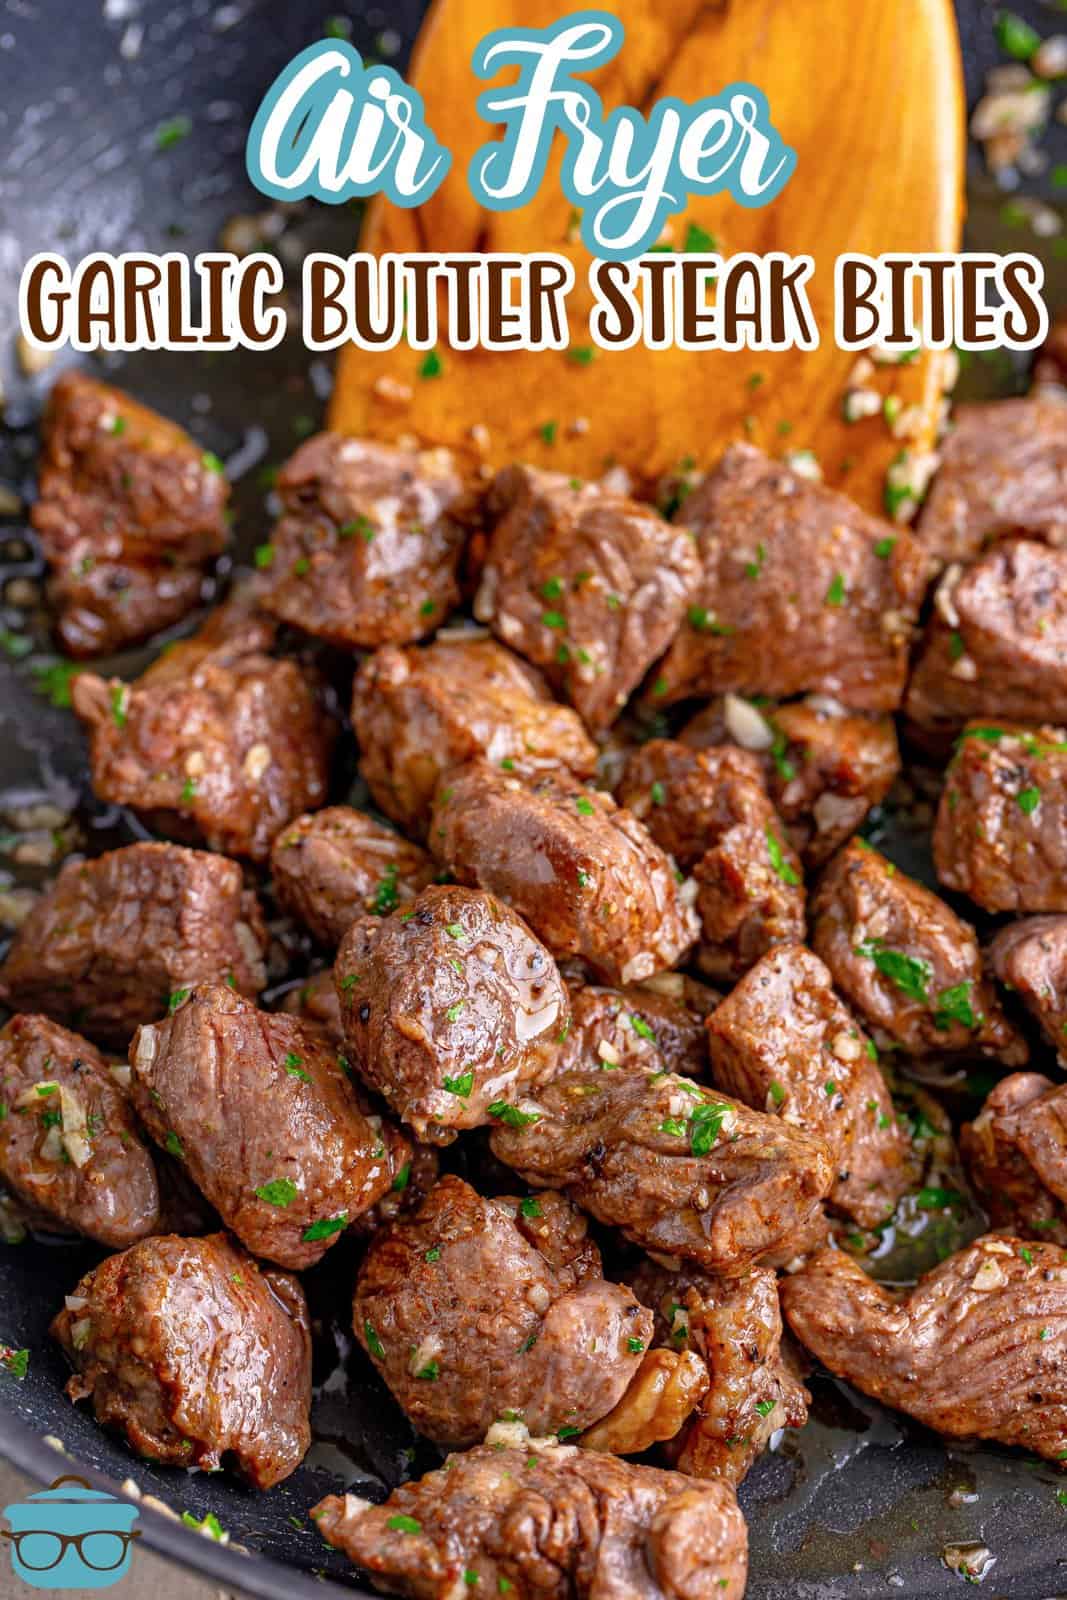 A wooden spoon pushing the Garlic Butter Steak Bites in a pile.